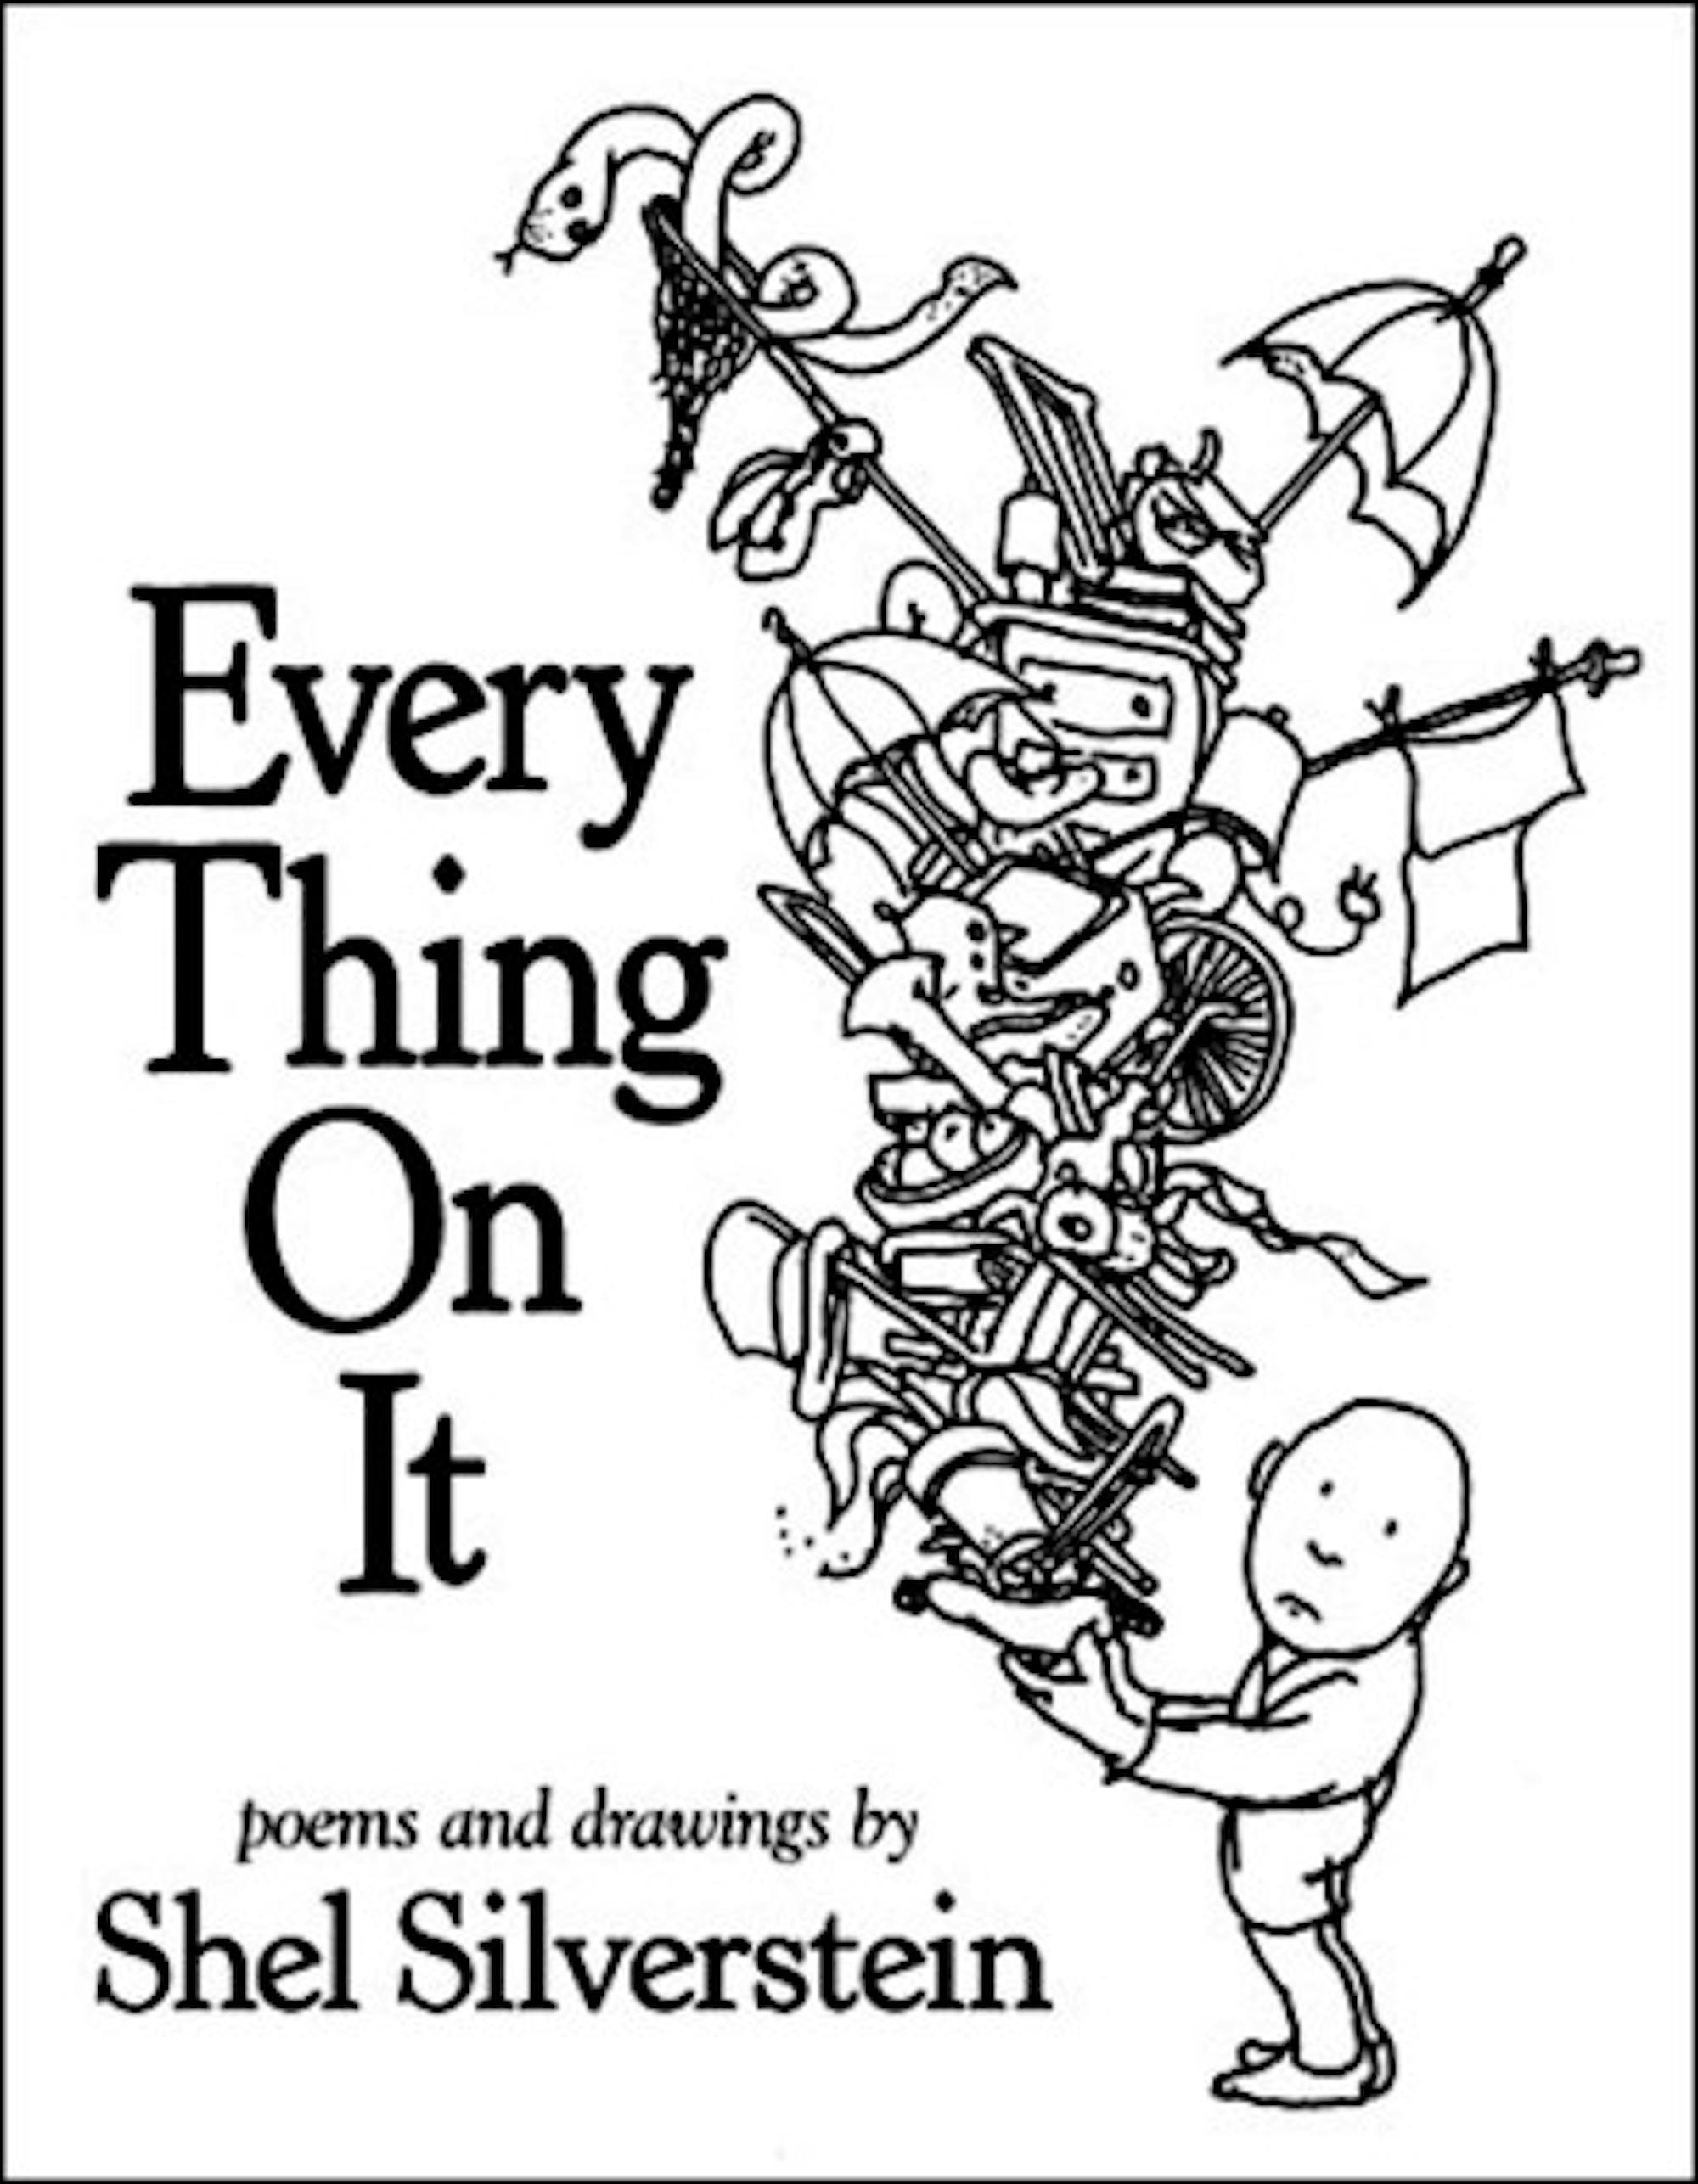 The recent posthumous release of poems by Shel Silverstein, 